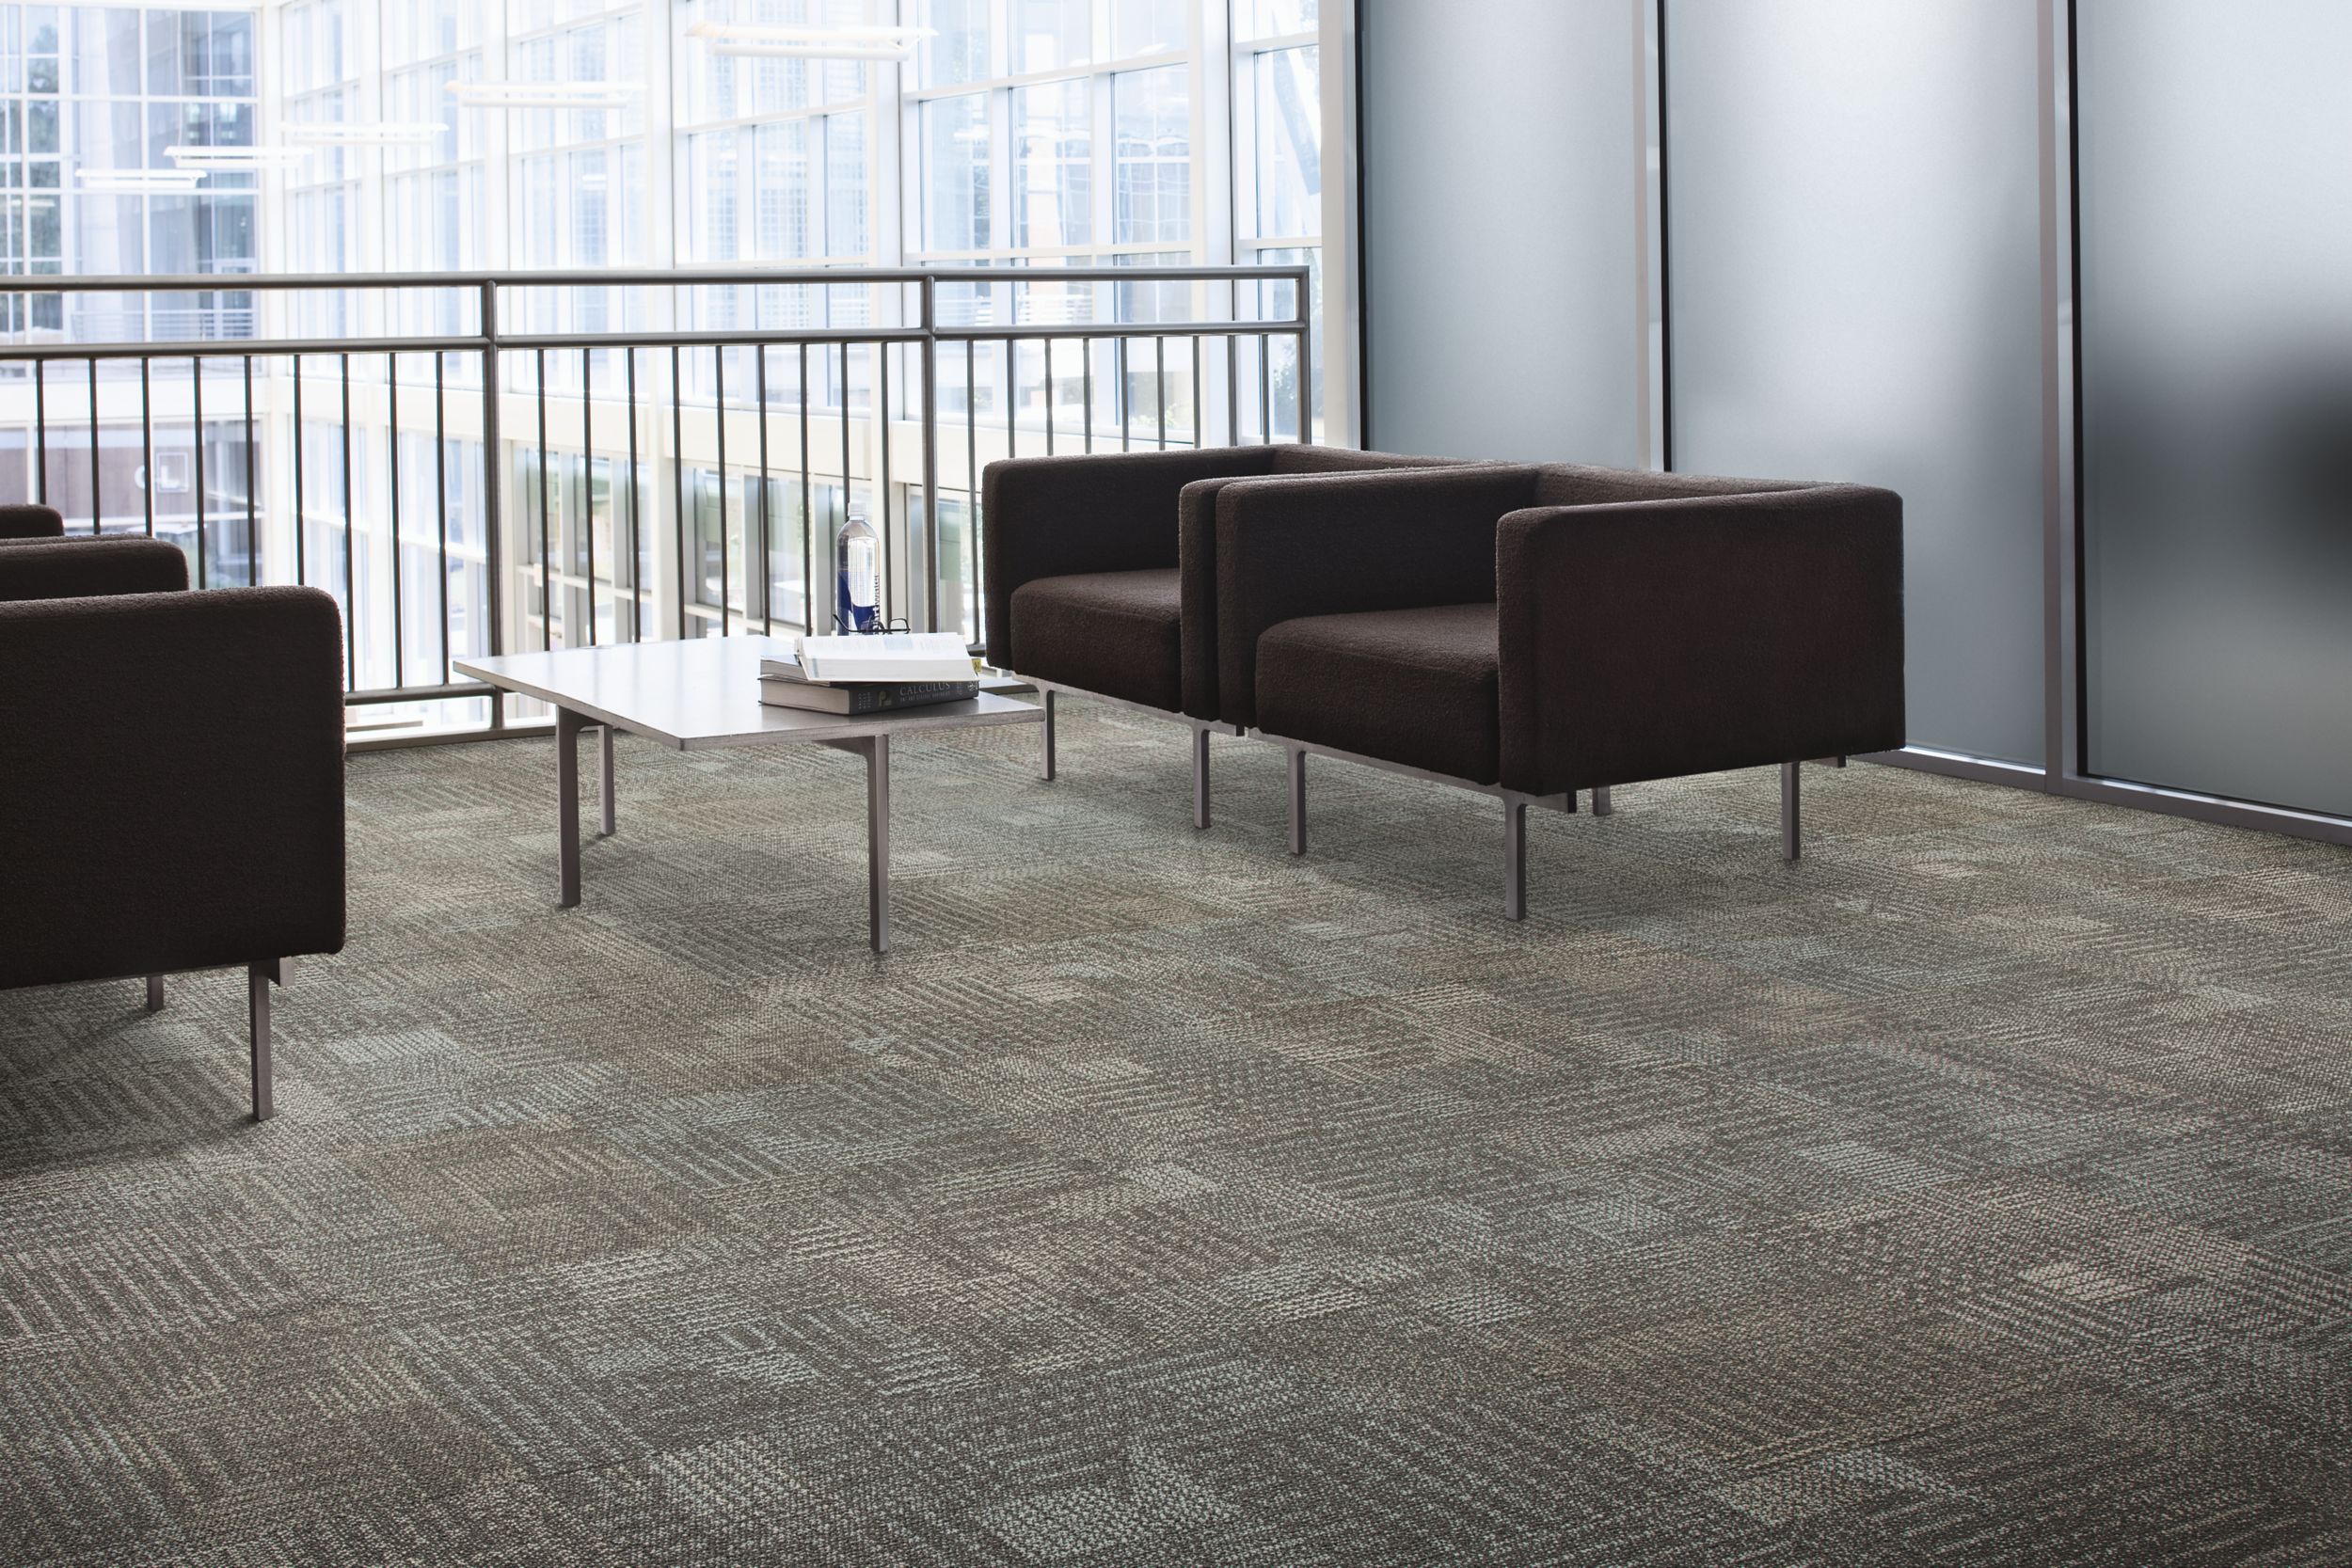 Interface Work carpet tile in lobby setting with couch and chairs imagen número 1